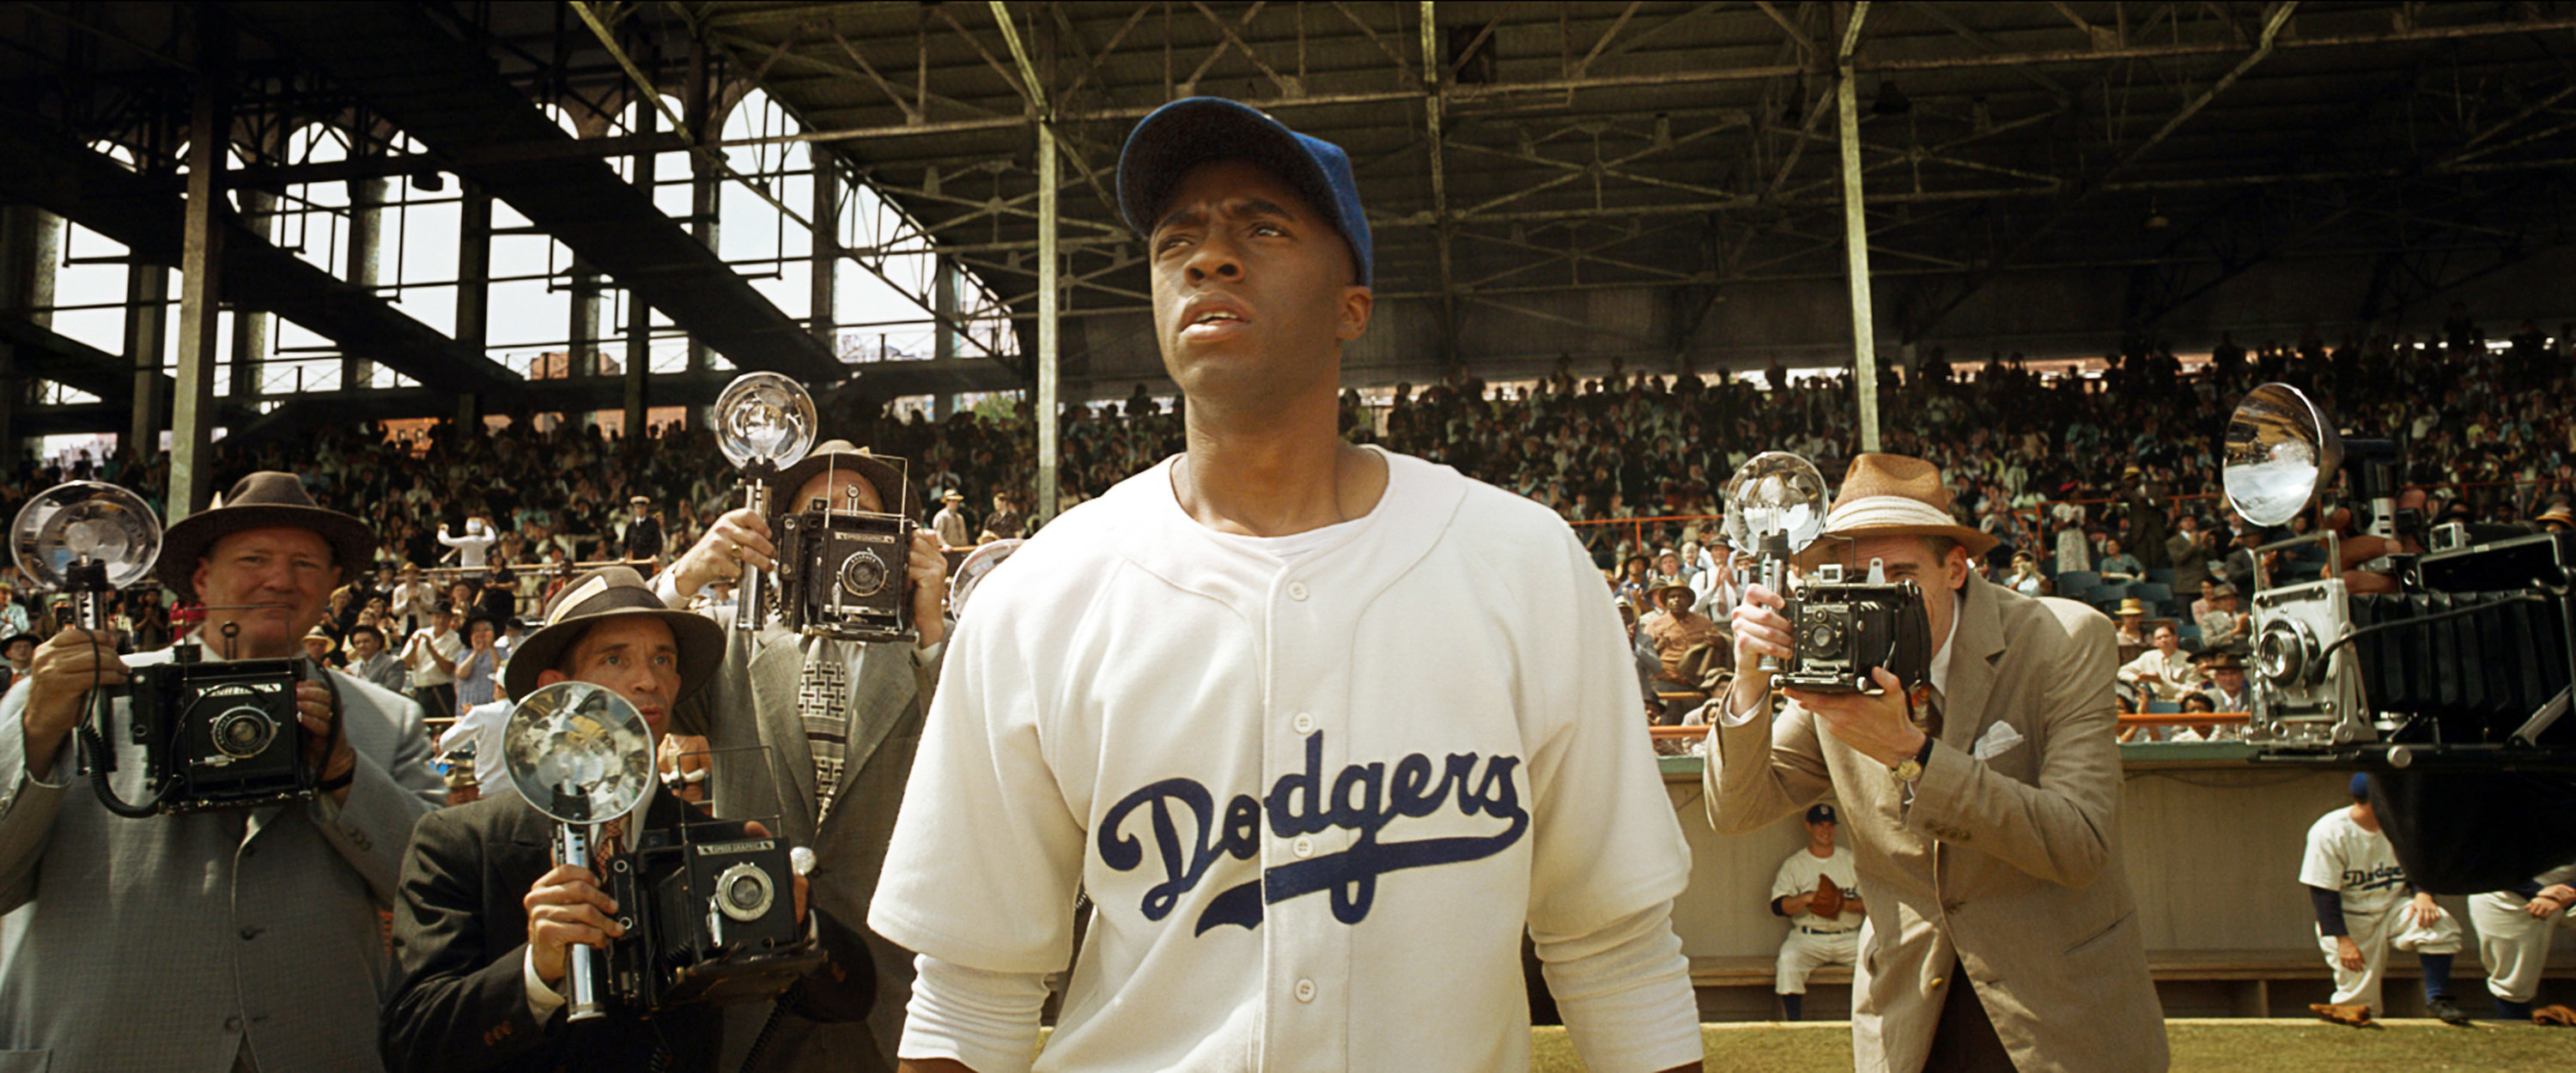 Jackie Robinson wearing his Dodgers uniform in the film